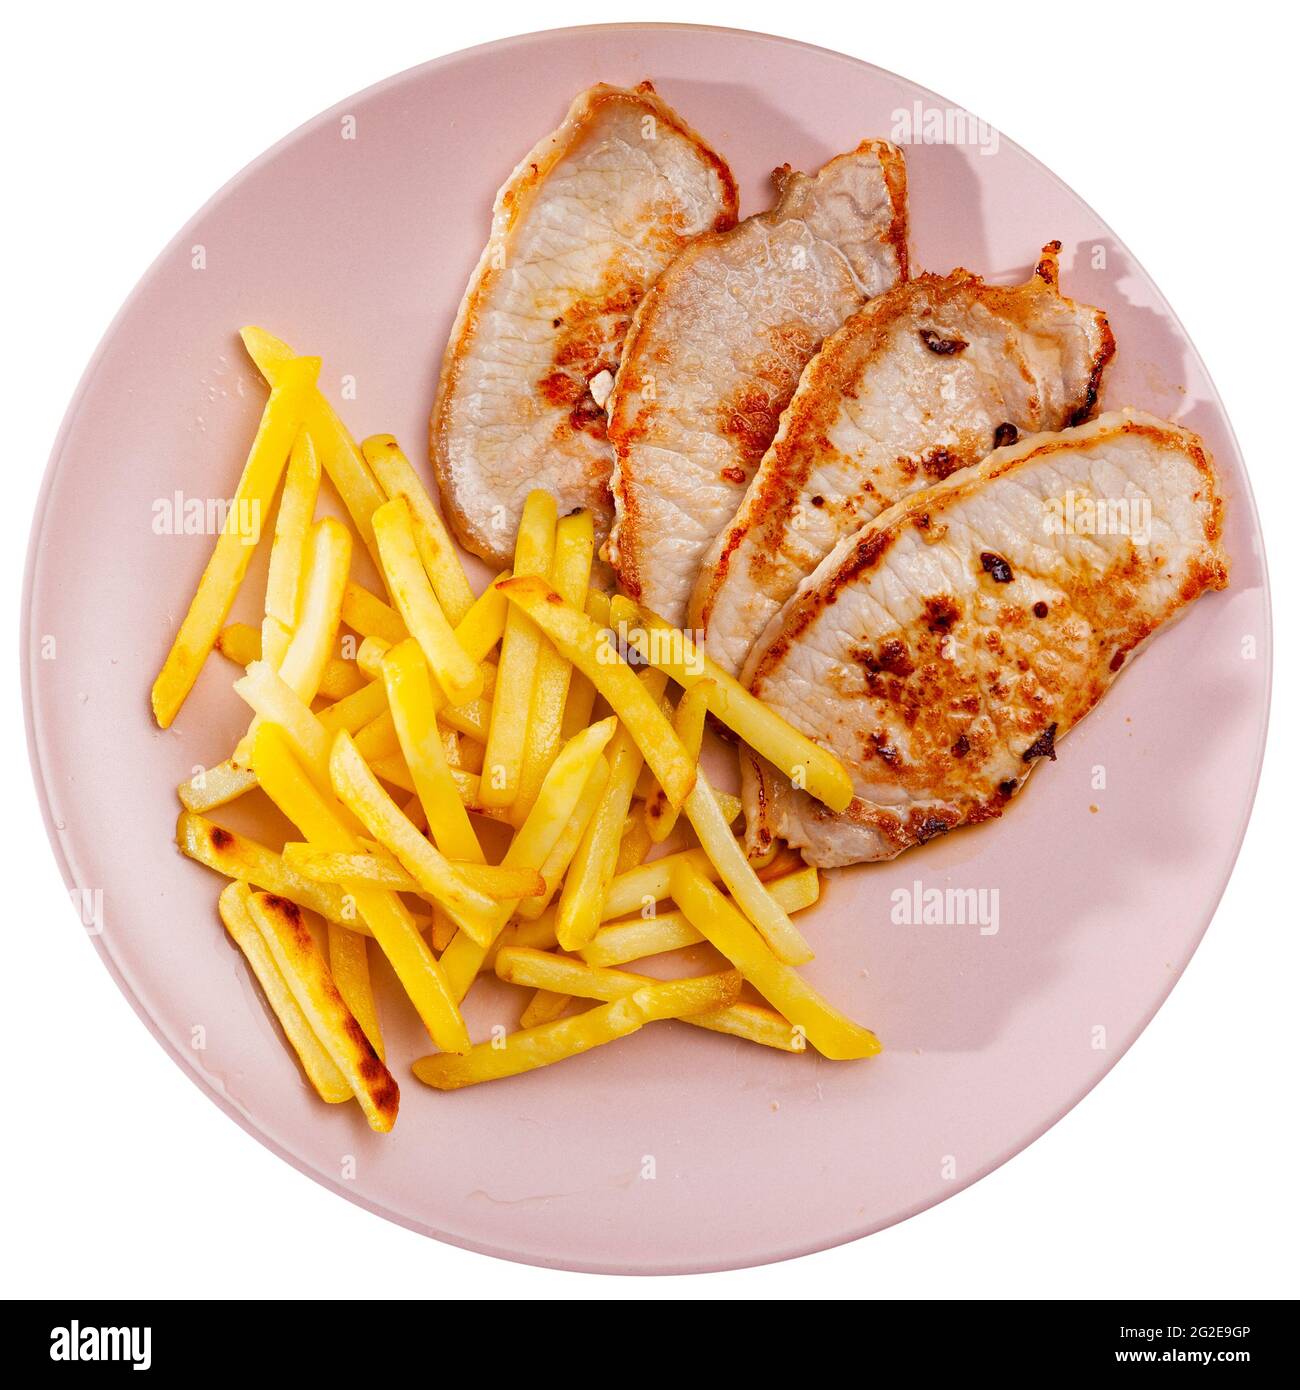 Tasty hearty lunch of roasted steaks of pork loin served with fried potatoes Stock Photo